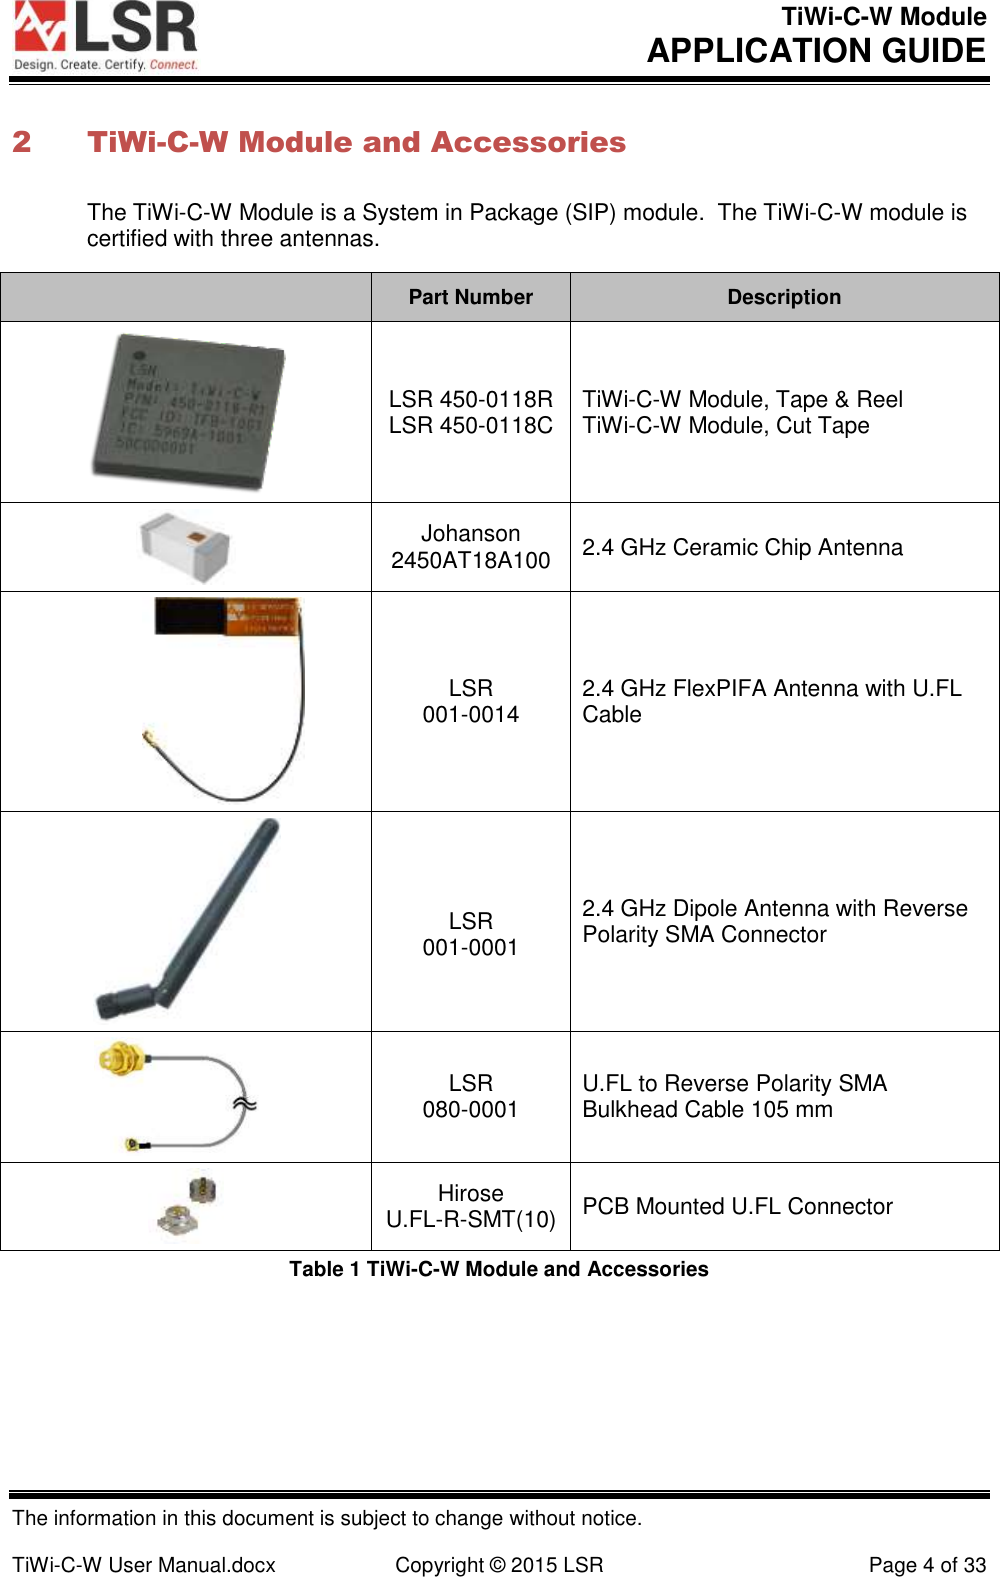 TiWi-C-W Module       APPLICATION GUIDE  The information in this document is subject to change without notice.  TiWi-C-W User Manual.docx  Copyright © 2015 LSR  Page 4 of 33 2 TiWi-C-W Module and Accessories The TiWi-C-W Module is a System in Package (SIP) module.  The TiWi-C-W module is certified with three antennas.       Part Number Description  LSR 450-0118R LSR 450-0118C TiWi-C-W Module, Tape &amp; Reel TiWi-C-W Module, Cut Tape  Johanson 2450AT18A100 2.4 GHz Ceramic Chip Antenna  LSR 001-0014 2.4 GHz FlexPIFA Antenna with U.FL Cable   LSR 001-0001 2.4 GHz Dipole Antenna with Reverse Polarity SMA Connector  LSR 080-0001 U.FL to Reverse Polarity SMA Bulkhead Cable 105 mm  Hirose  U.FL-R-SMT(10) PCB Mounted U.FL Connector Table 1 TiWi-C-W Module and Accessories   